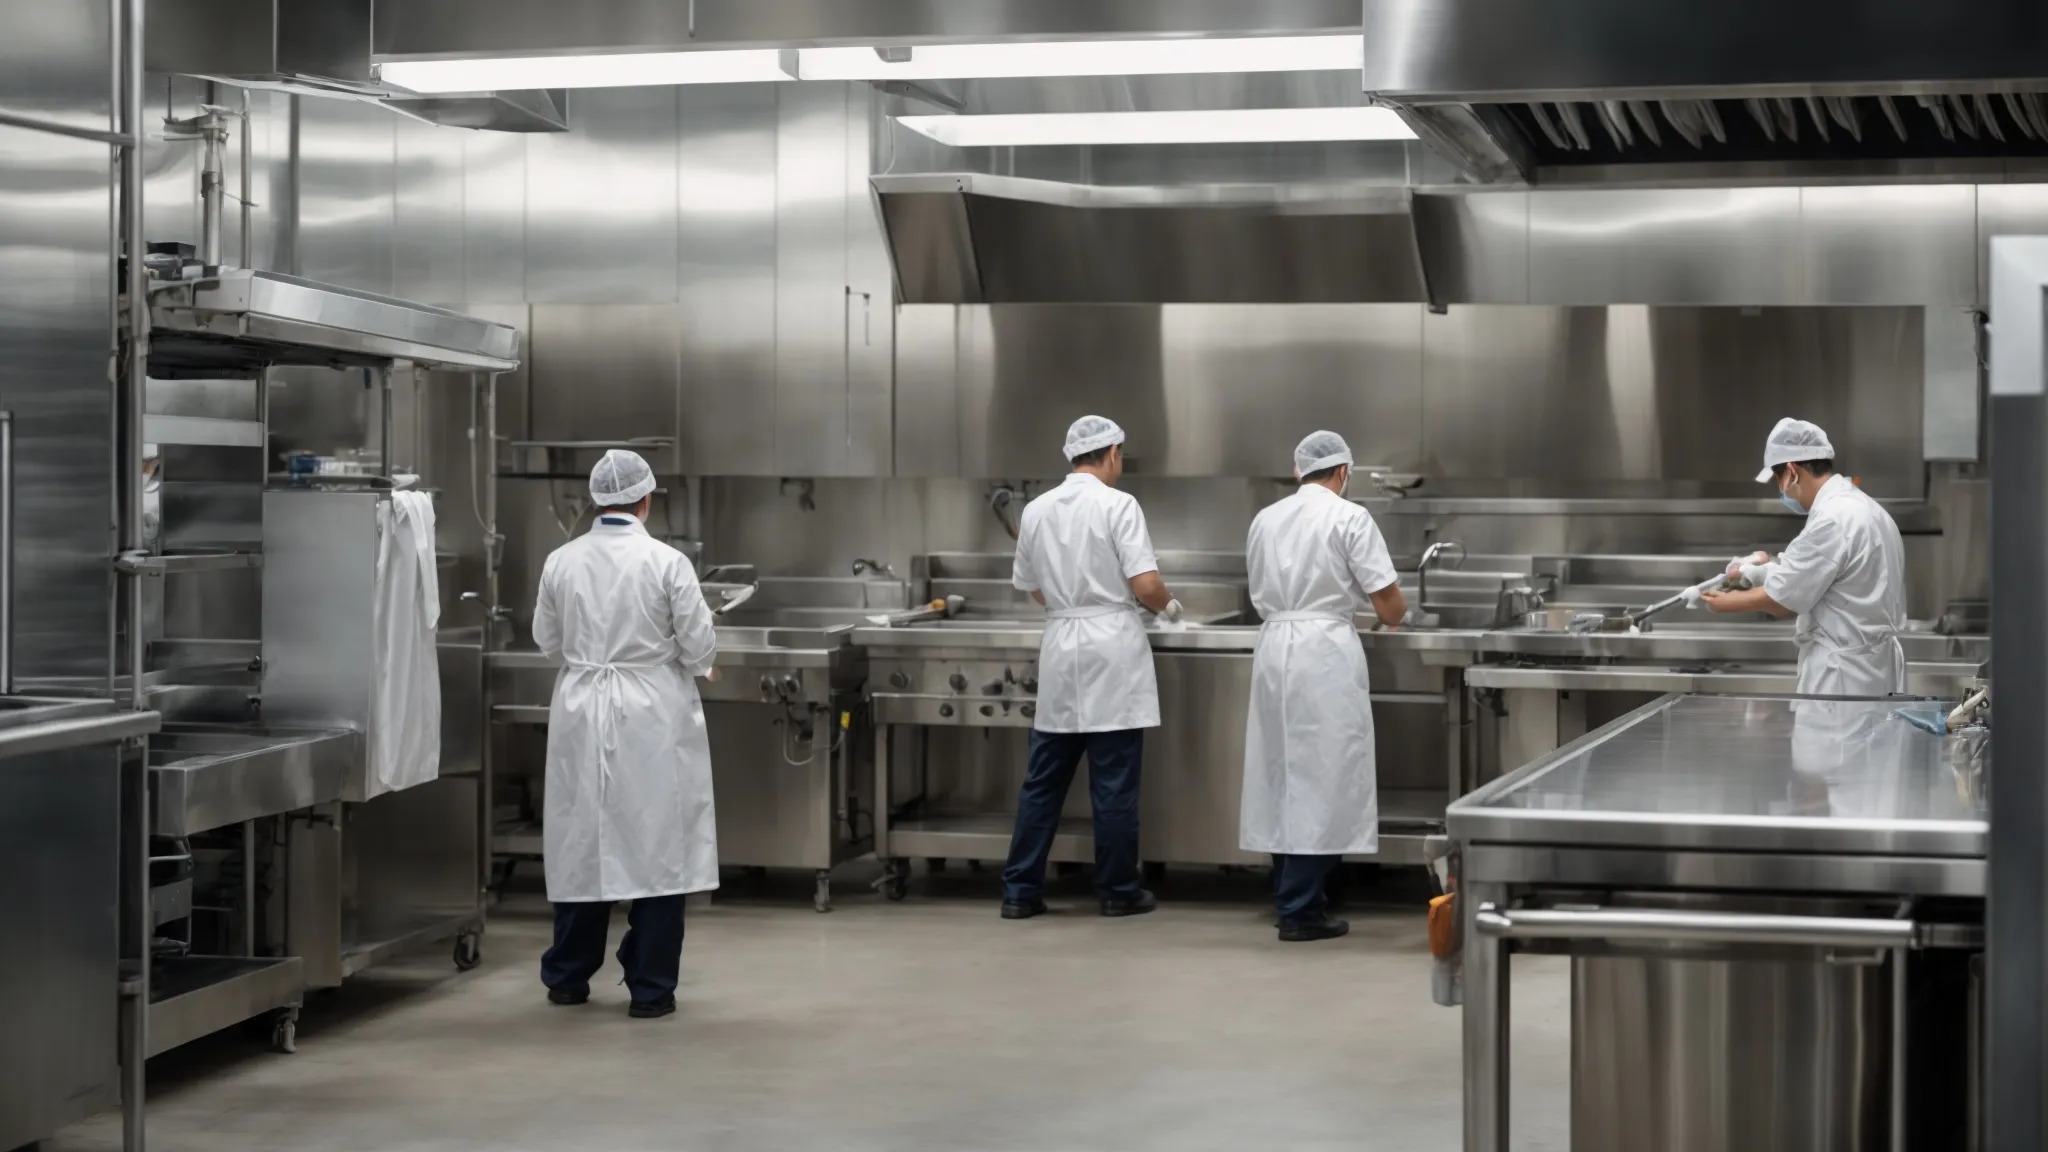 a professional team is meticulously scrubbing and sanitizing a large, stainless steel commercial kitchen to ensure it meets health and safety standards.